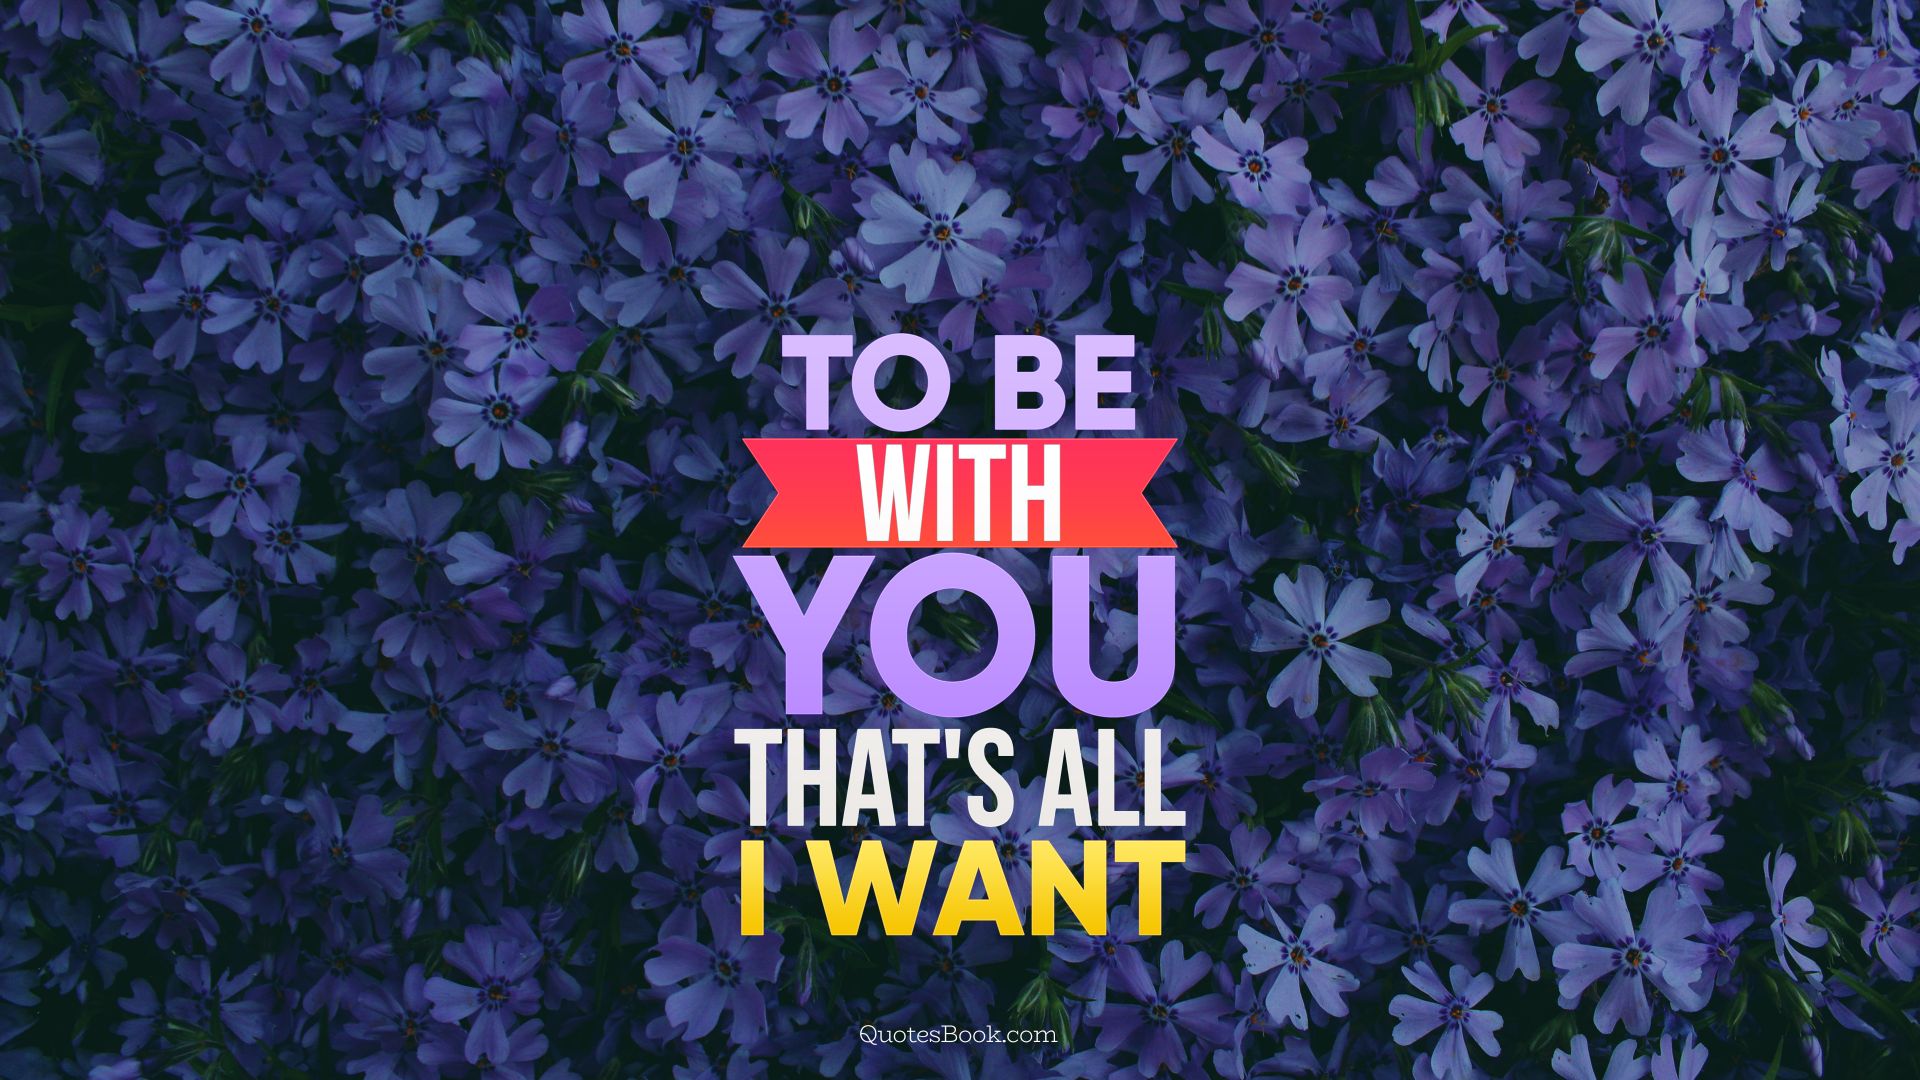 To be with you, that's all I want